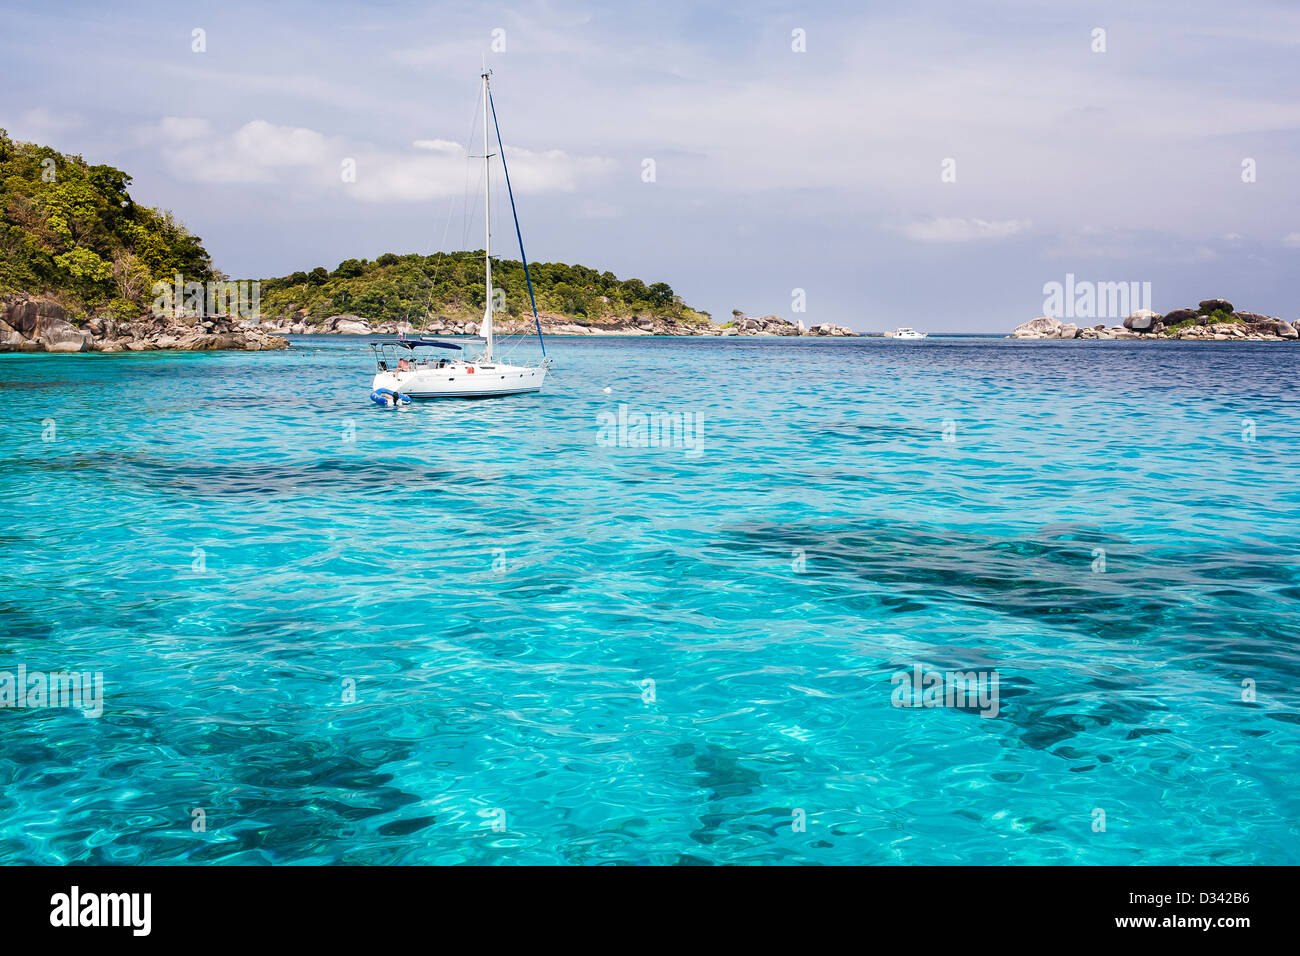 The Similan Islands in the Andaman Sea, Thailand. Stock Photo